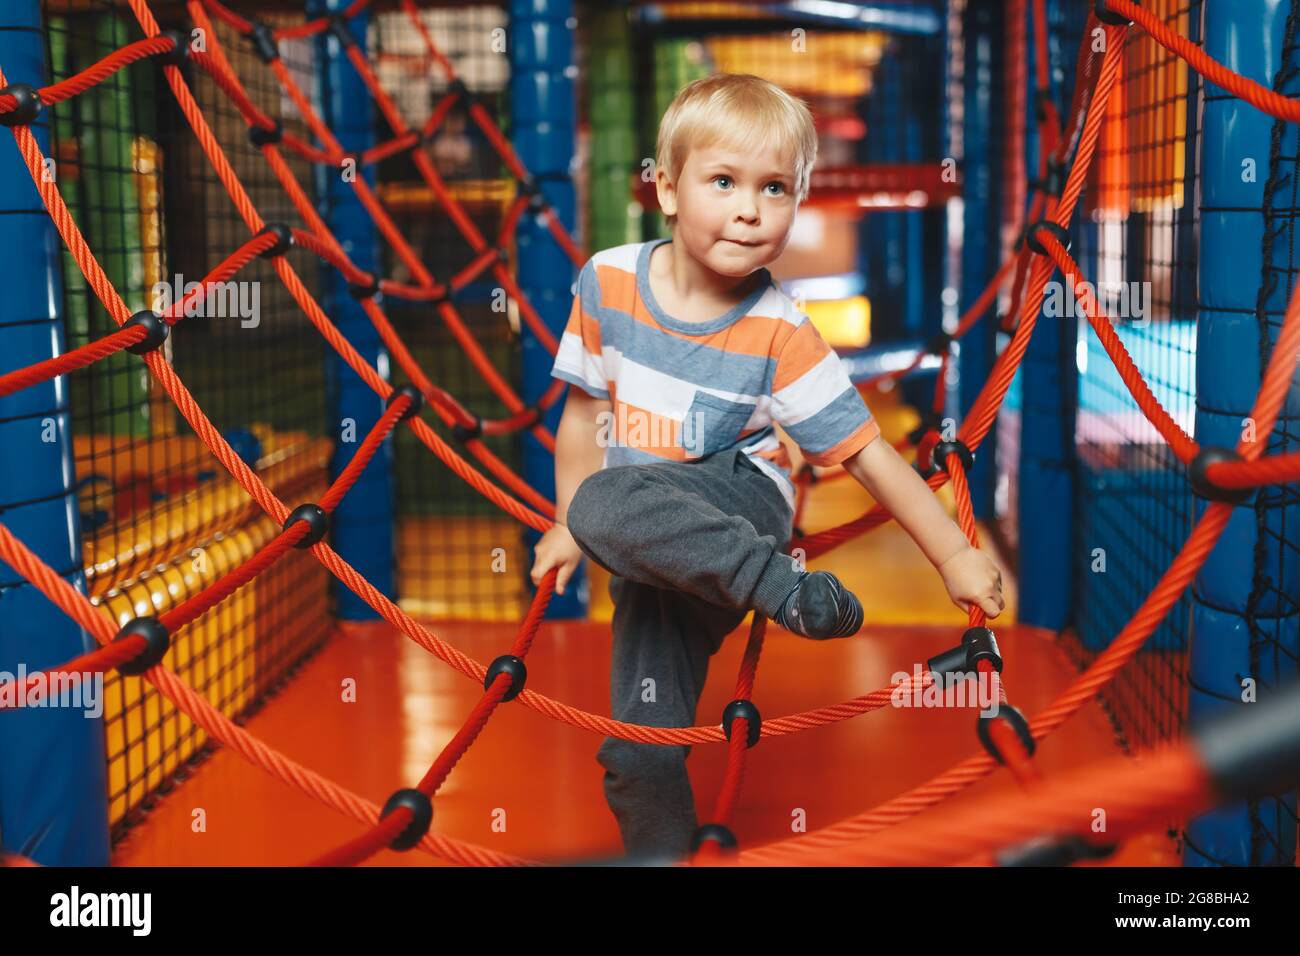 Happy boy playing in indoor playground on net trail. Child having fun on modern playground. Cute kid playing on colorful playground at shopping mall Stock Photo